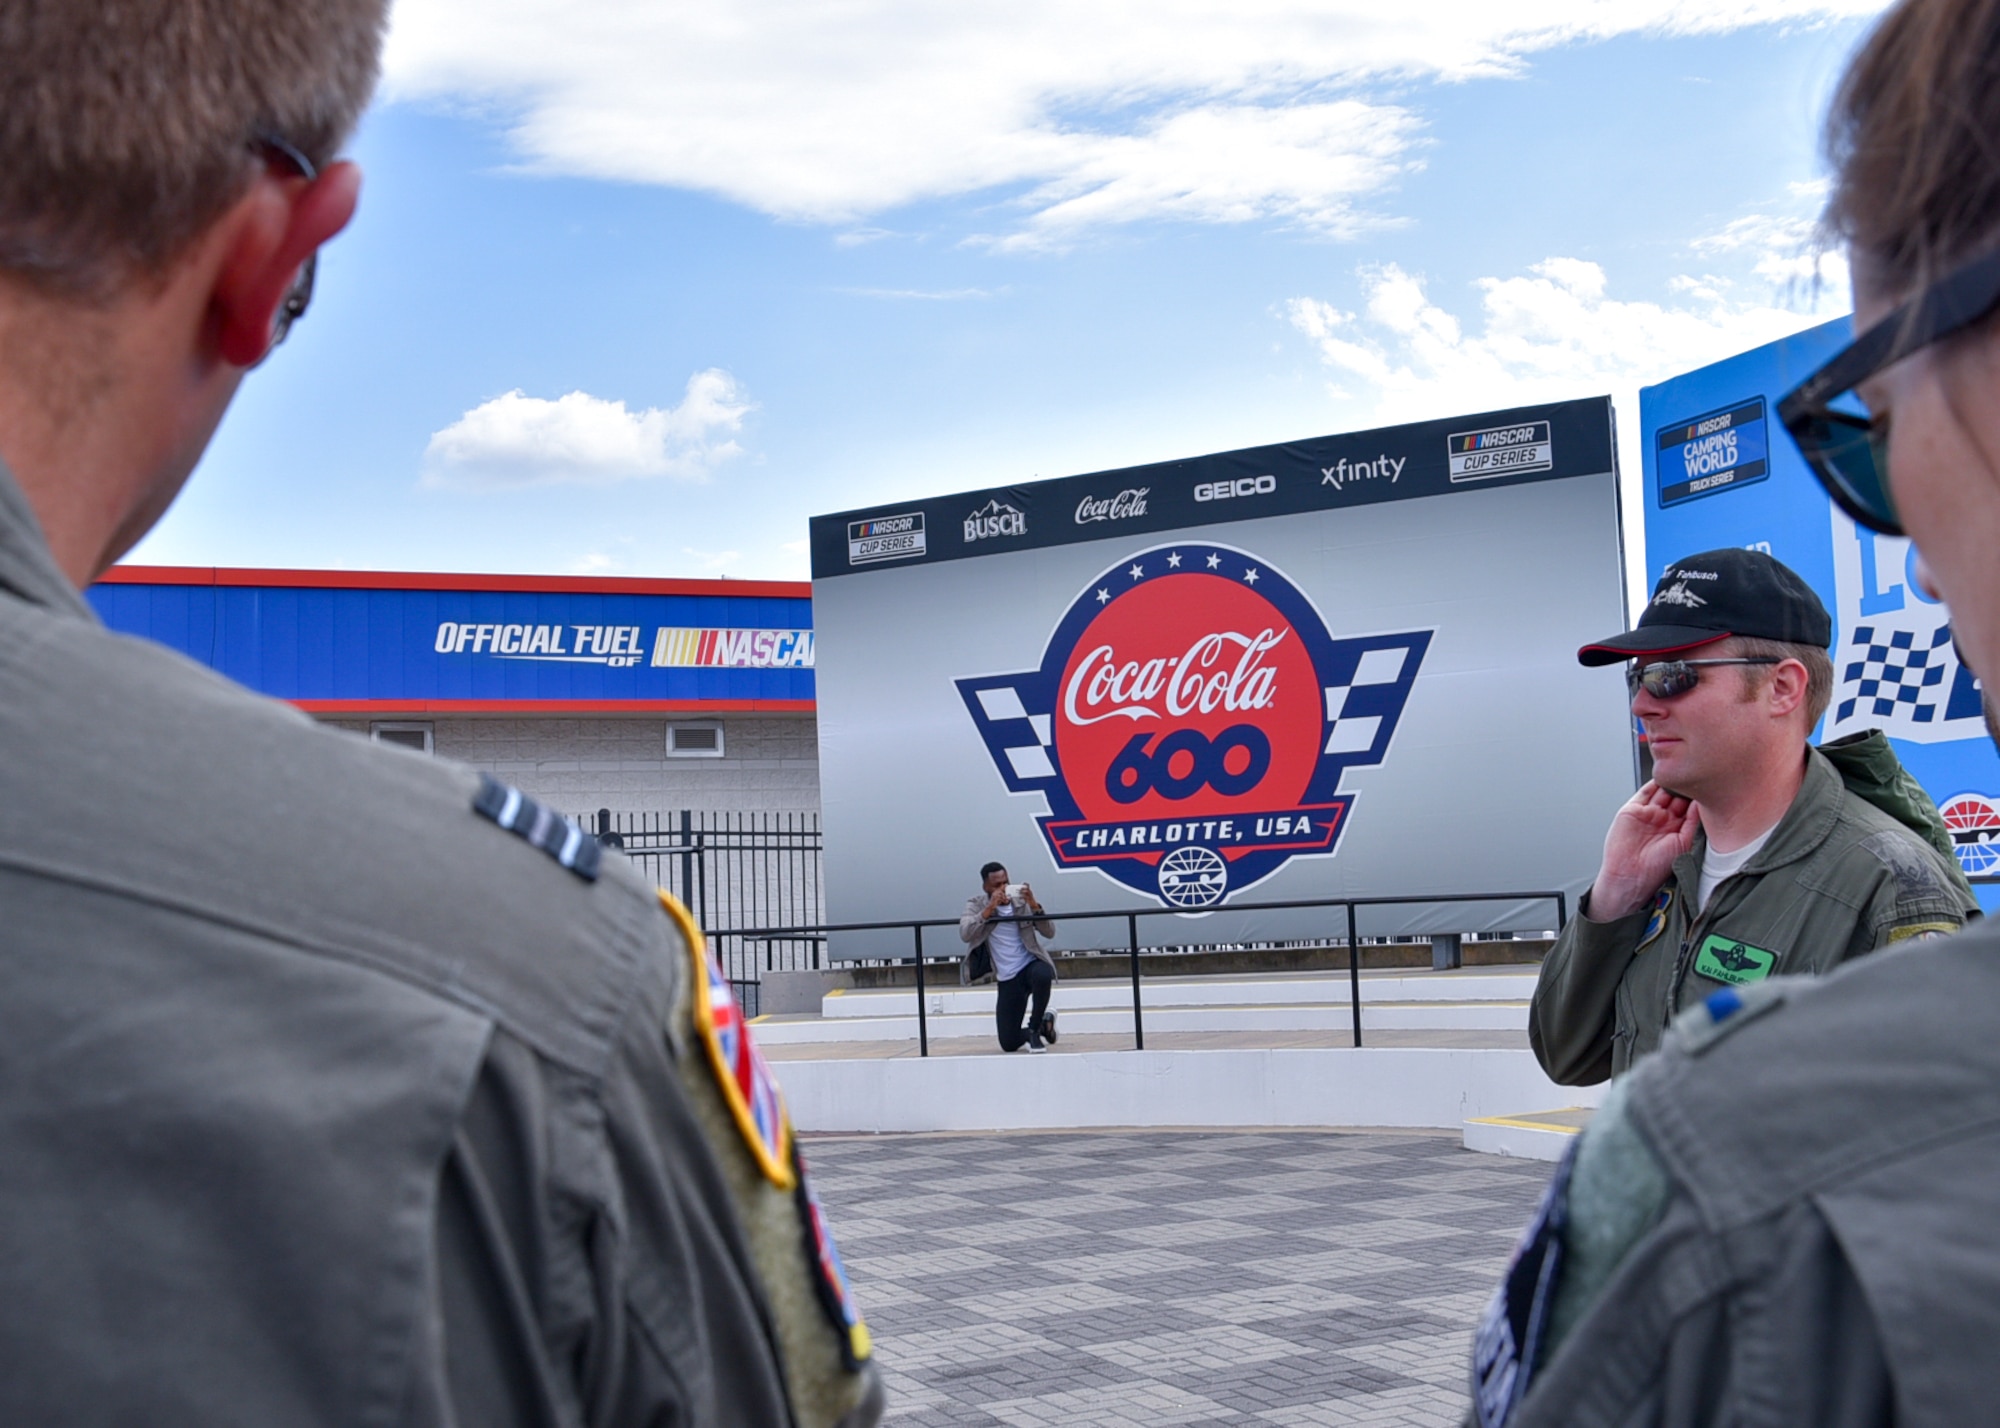 Sheppard Air Force Base T-48 Talons support Memorial Day weekend Coca-Cola 600 NASCAR race